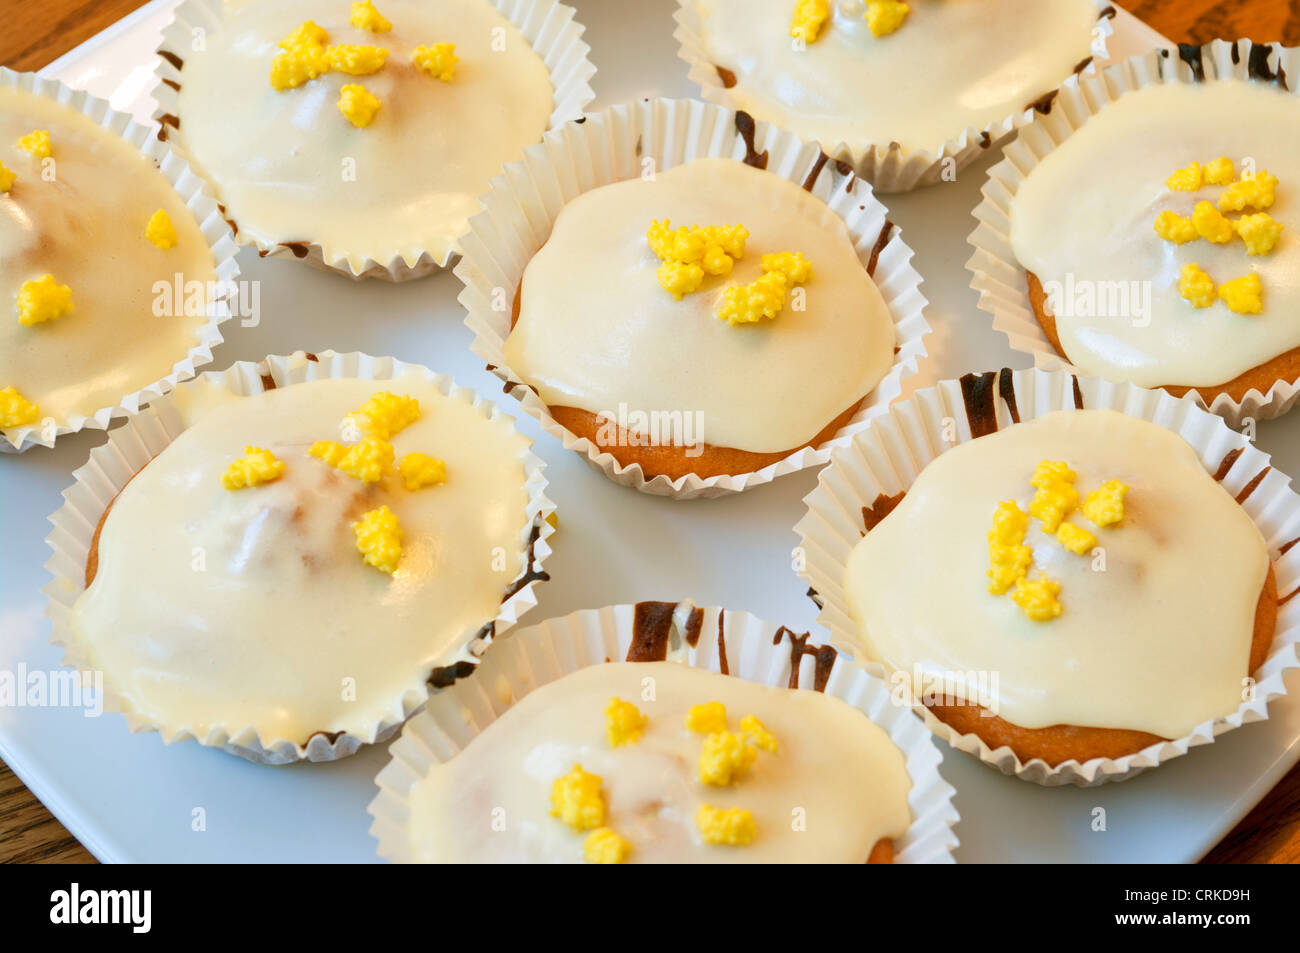 Plate Of Fairy Cakes Cup Cakes Cupcakes Stock Photo